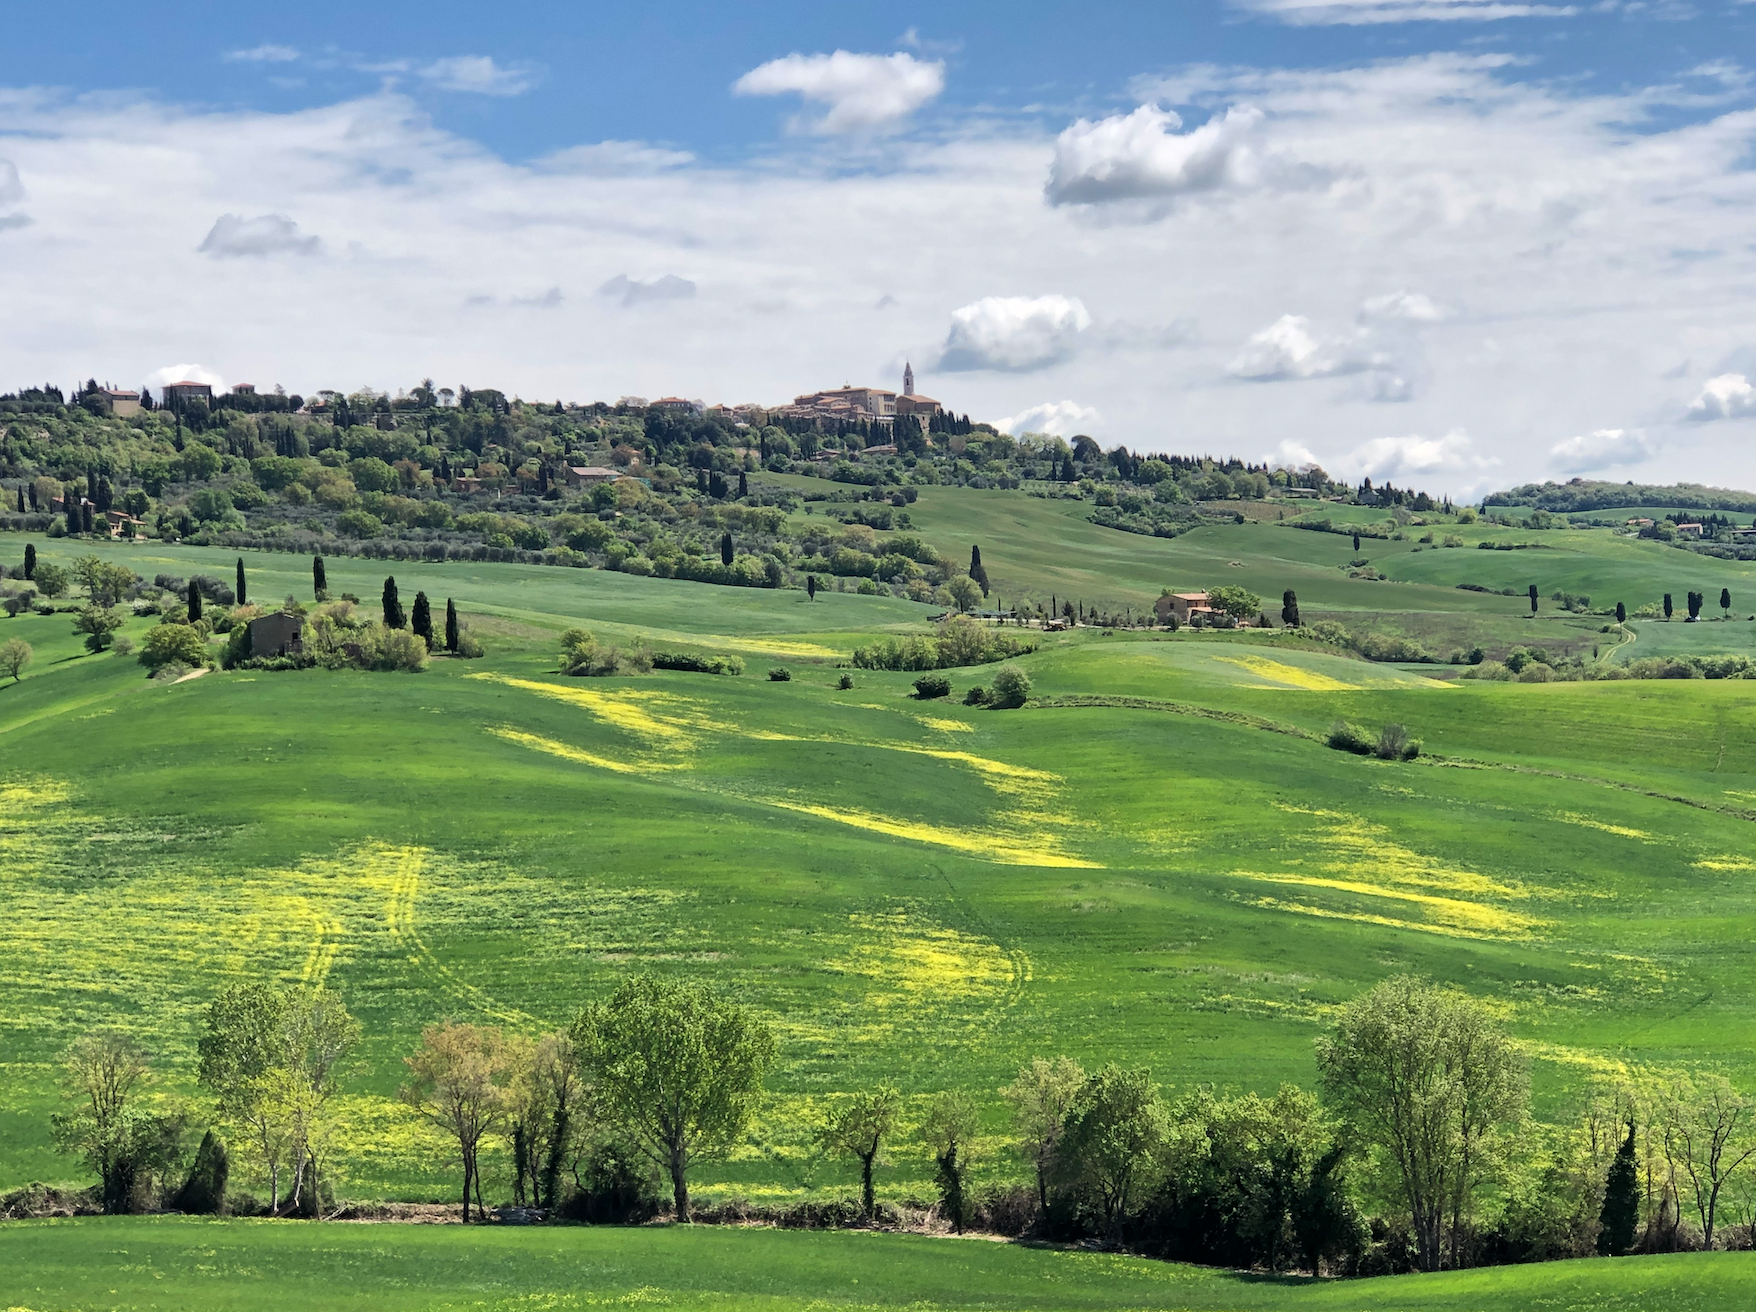 
The marvelous landscape of the Val d'Orcia